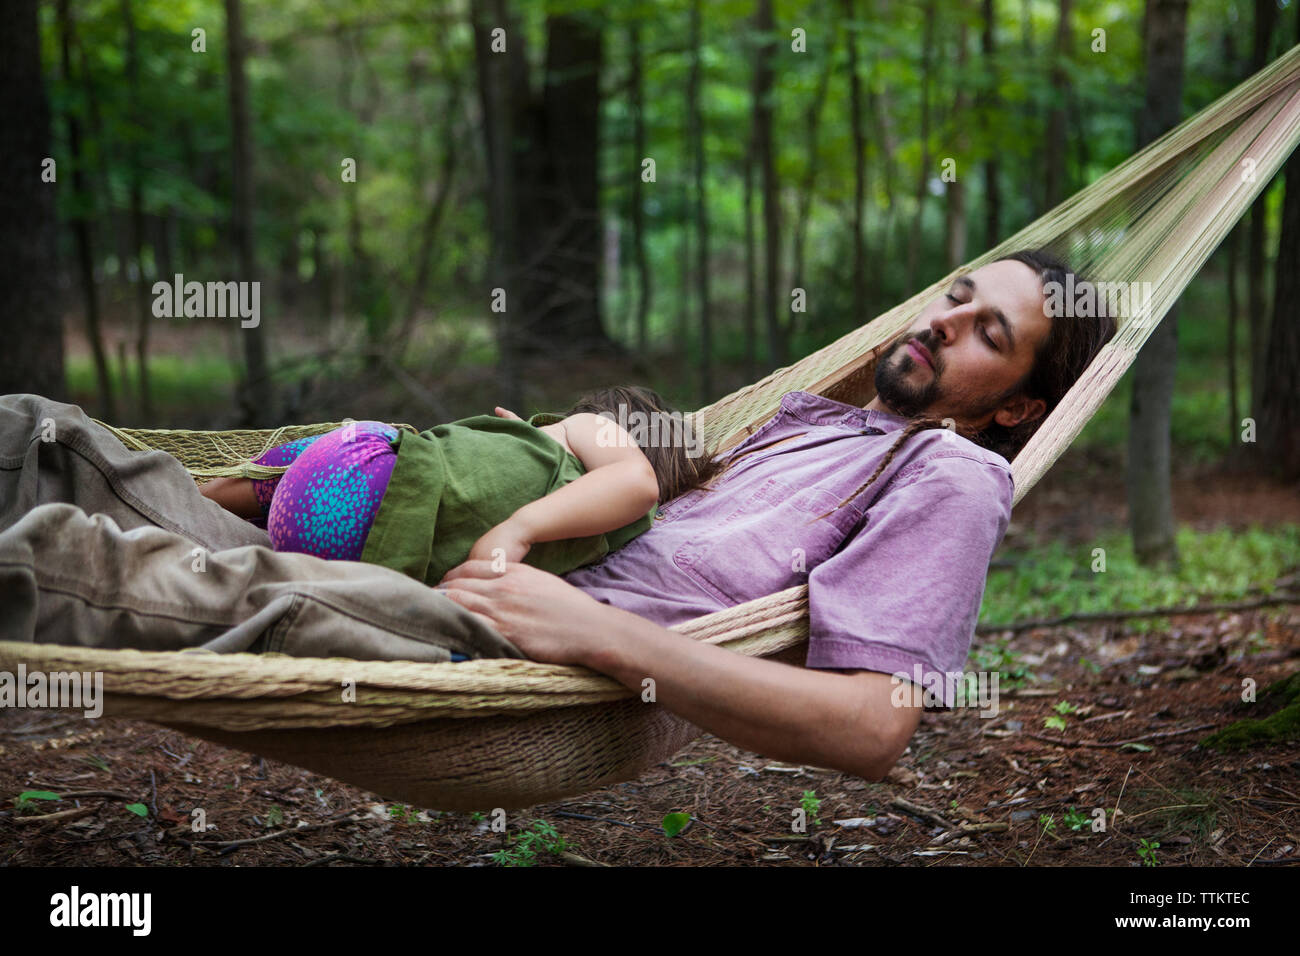 Father and daughter sleeping on hammock in forest Stock Photo